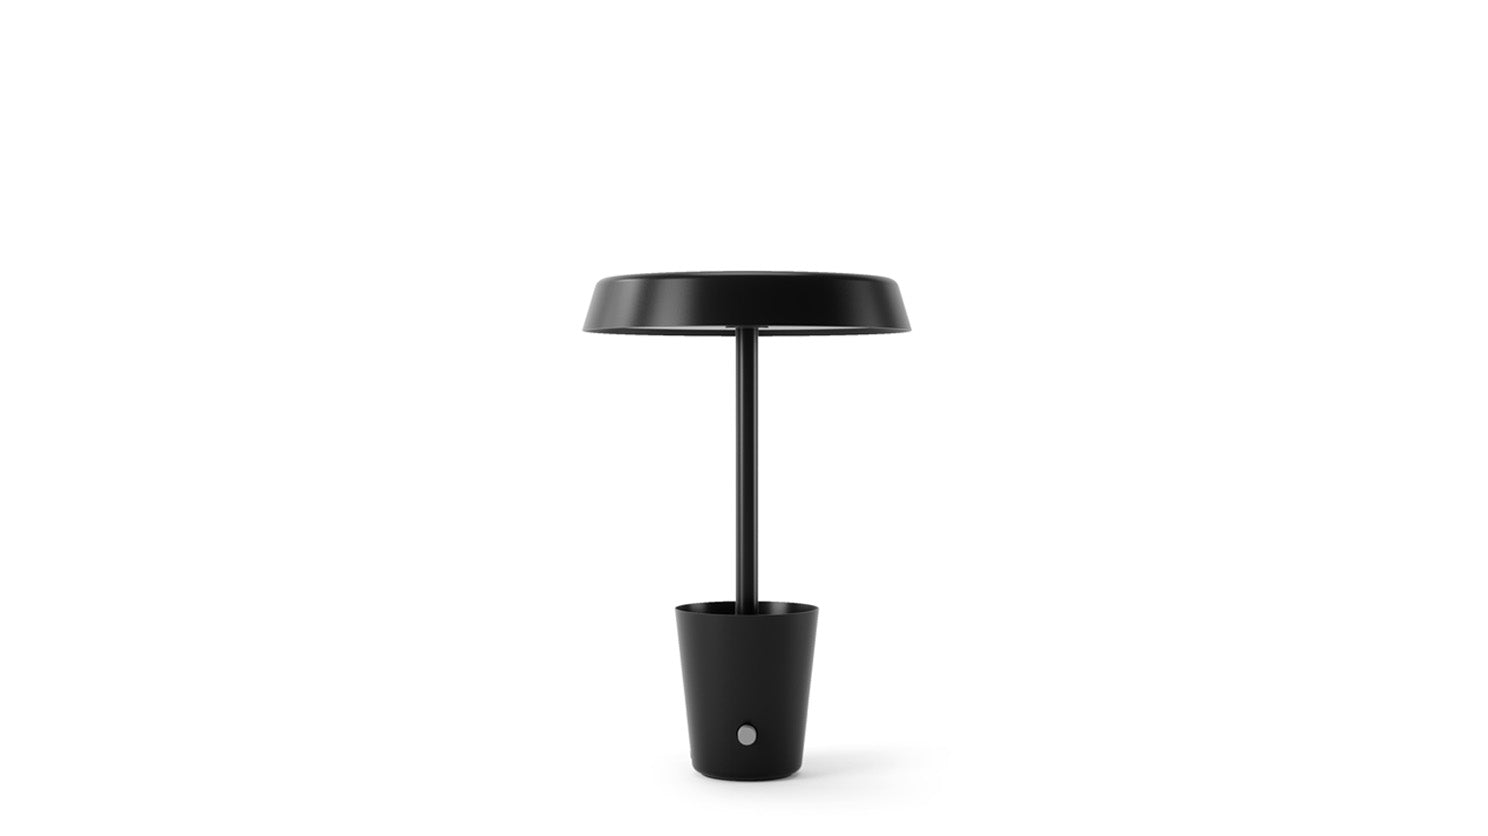 Three Candle Bouliette Table Lamp w/Black Shade, Table Lamps, Collection, City Knickerbocker